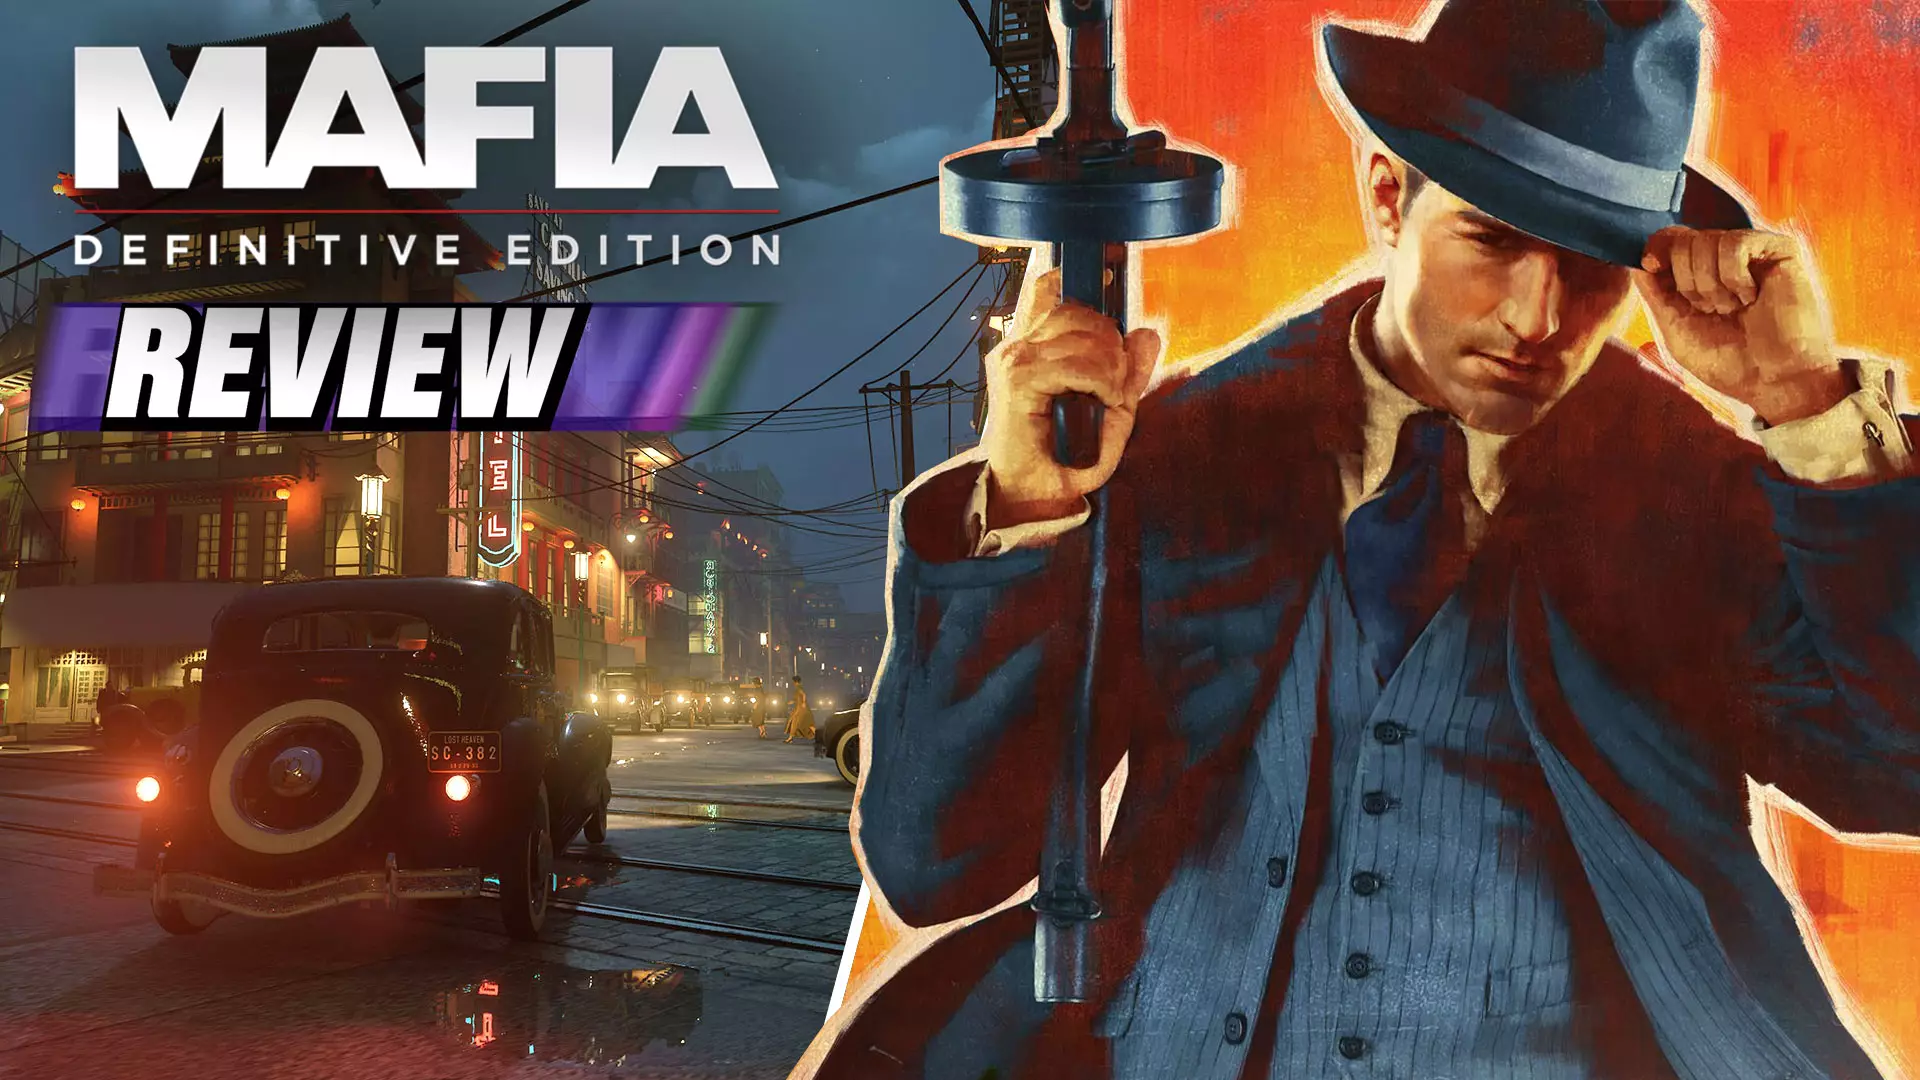 ​‘Mafia: Definitive Edition’ Review - An Open-World Game That Respects Your Time